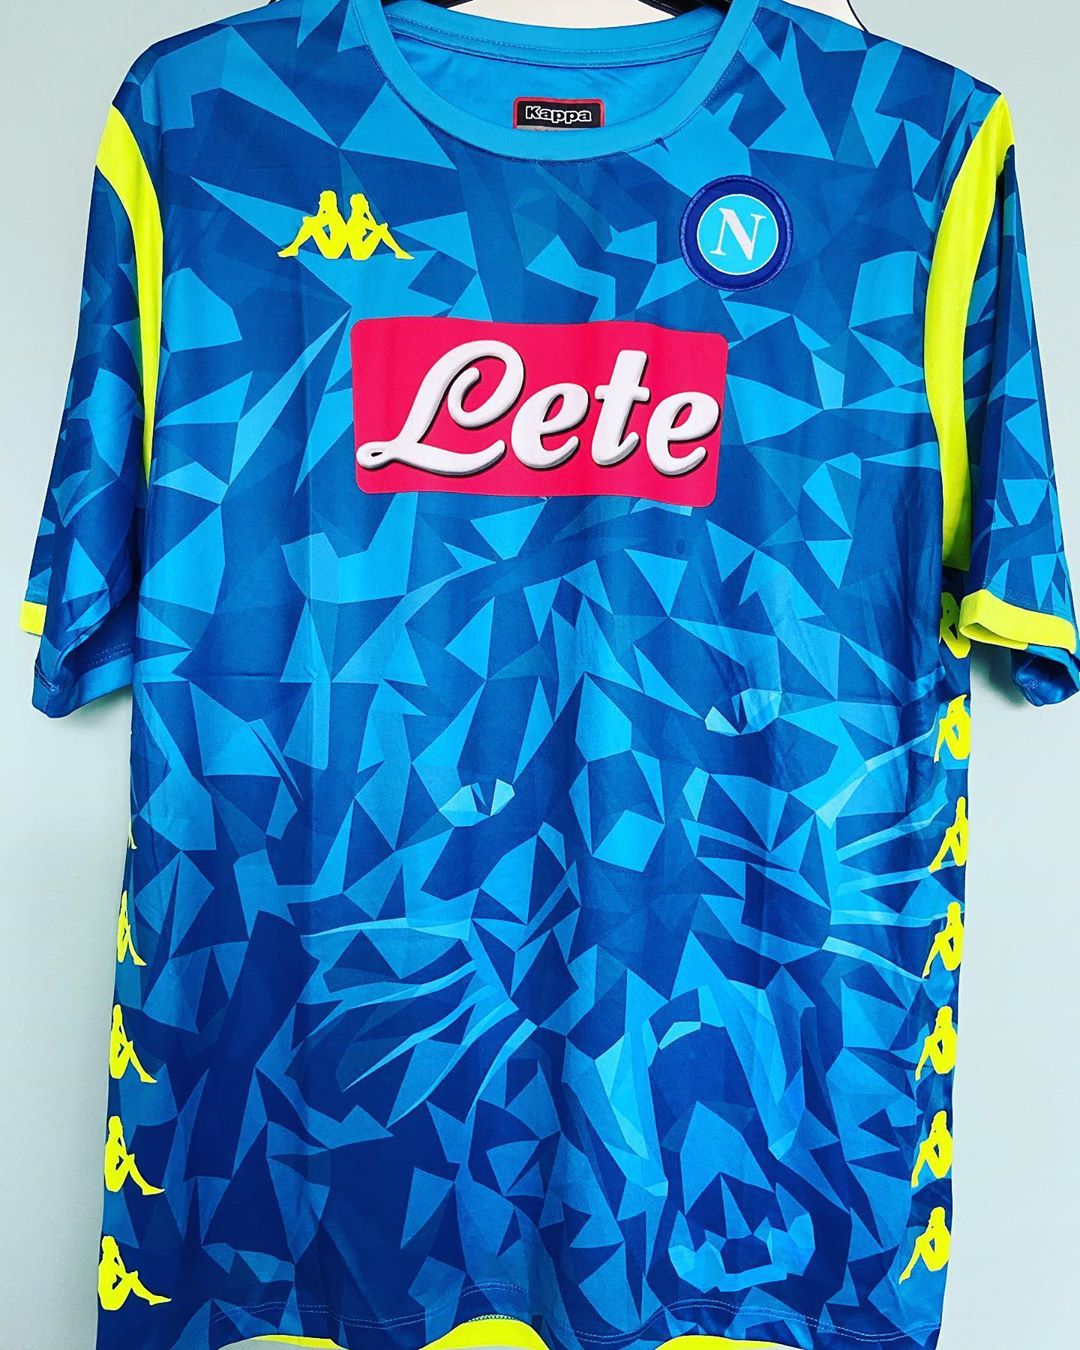 S.S.C. Napoli Home 2018/2019 Football Shirt Manufactured By Kappa. The club plays football in Italy.